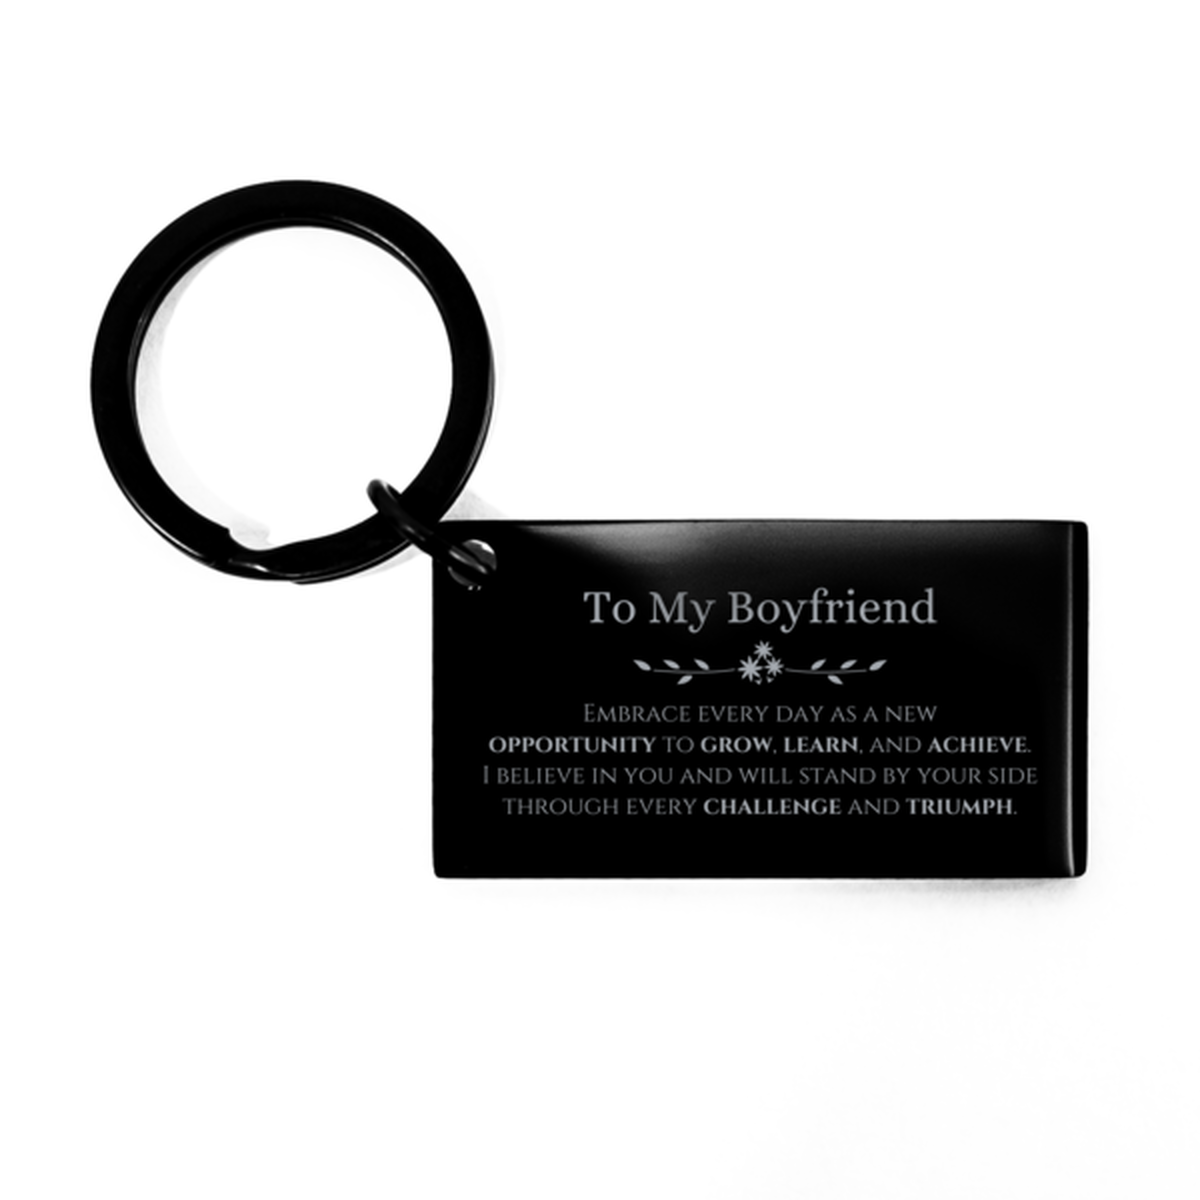 To My Boyfriend Gifts, I believe in you and will stand by your side, Inspirational Keychain For Boyfriend, Birthday Christmas Motivational Boyfriend Gifts